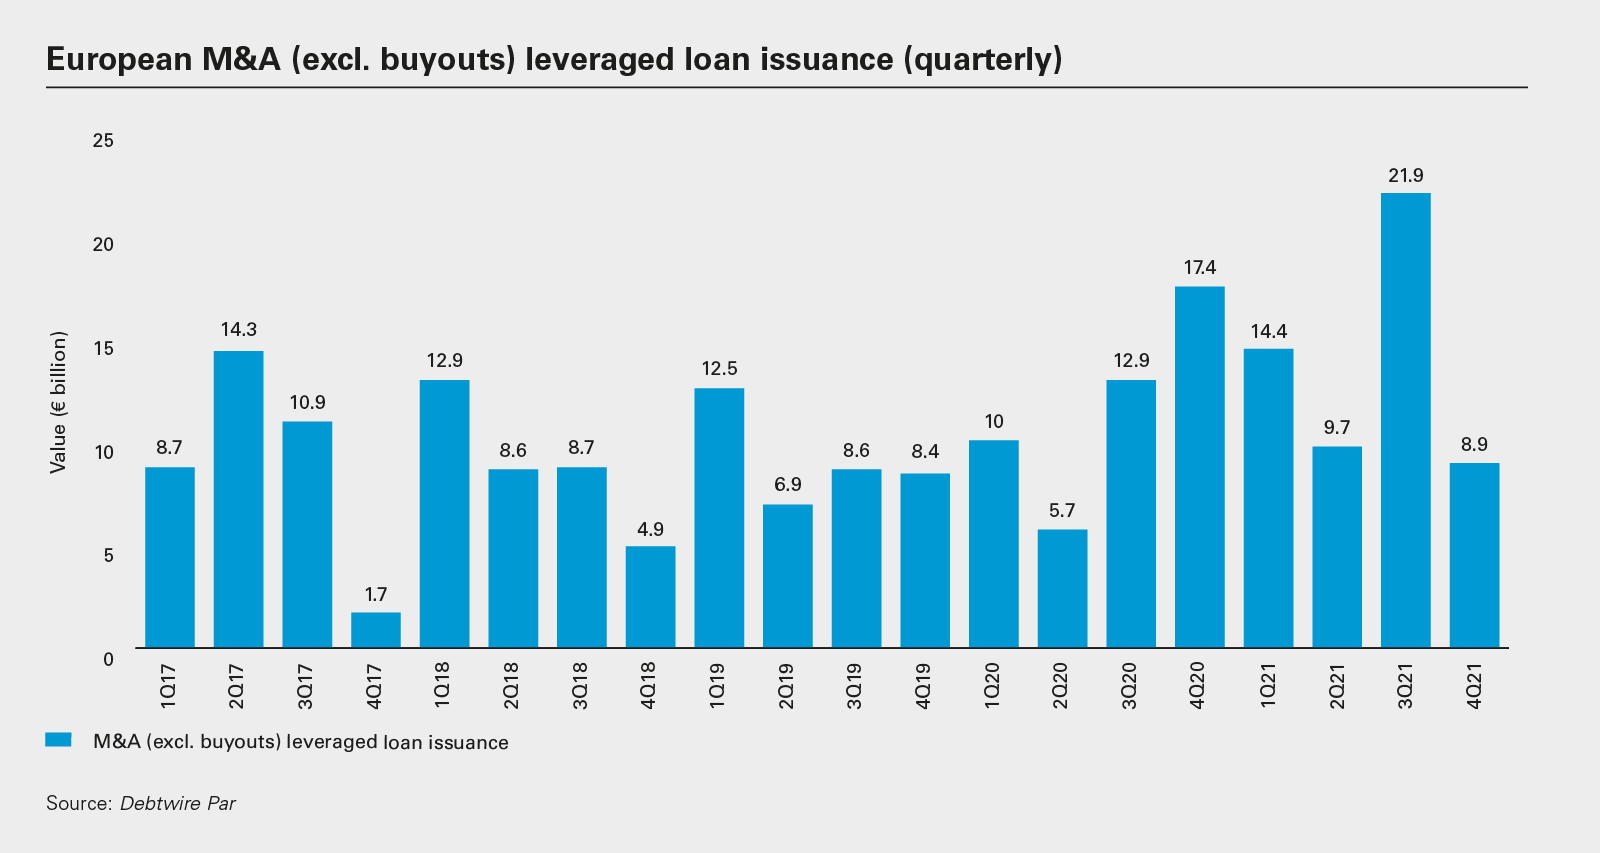 European M&A (excl. buyouts) leveraged loan issuance (quarterly)